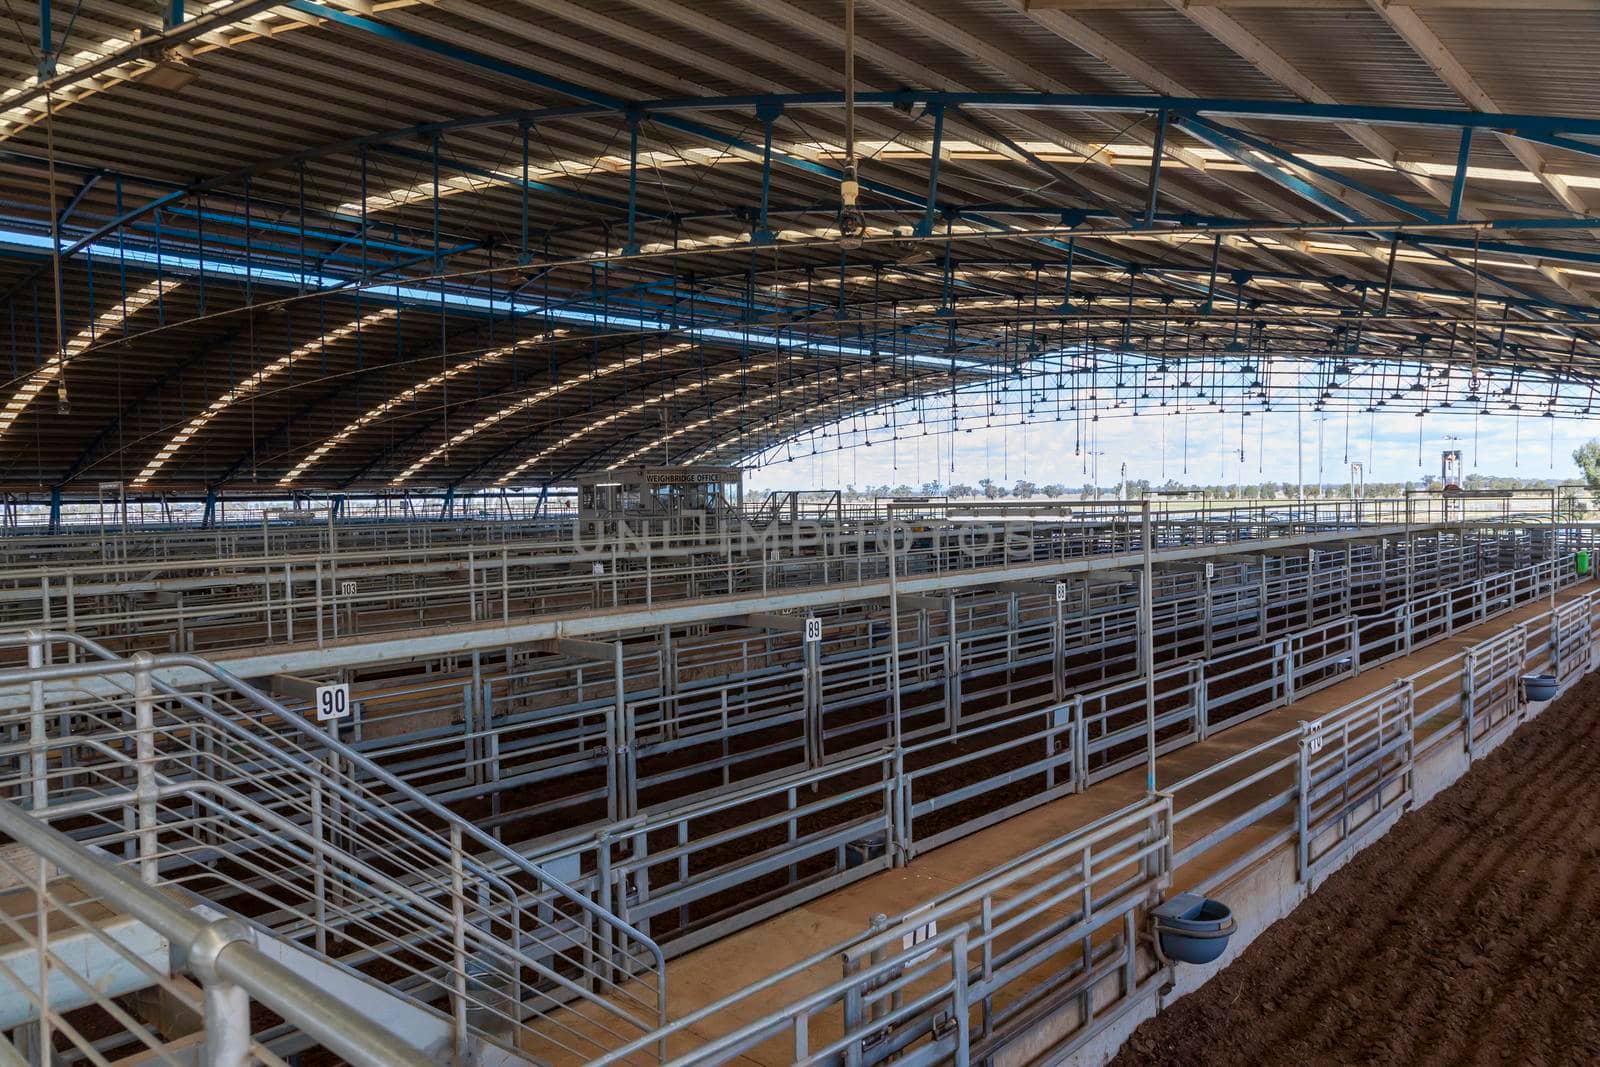 The Central West Livestock Exchange sale yards near Forbes in regional New South Wales in Australia